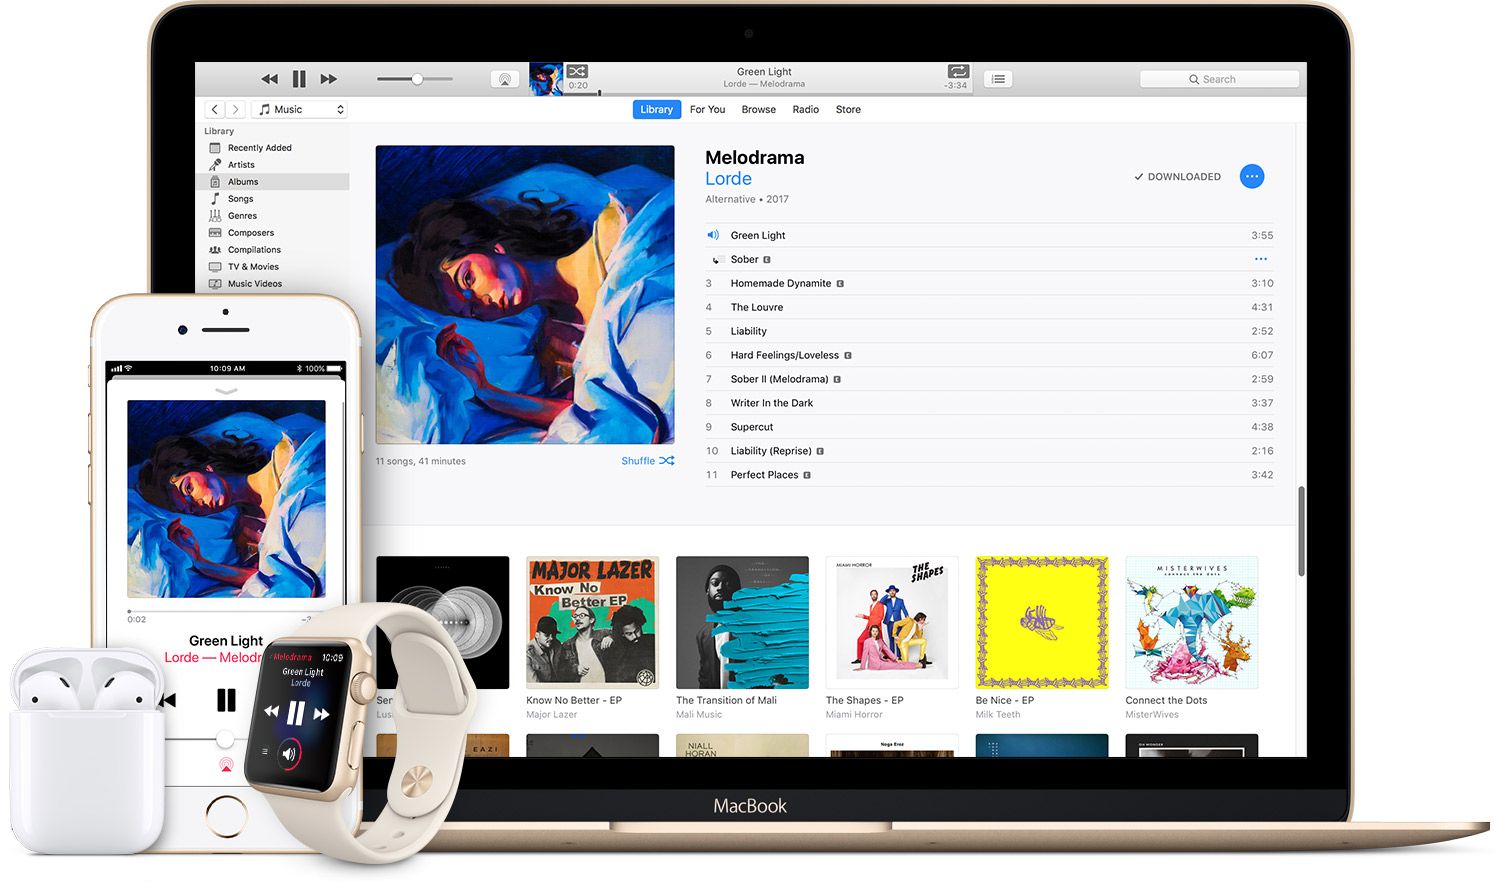 Join Apple Music on your iPhone, iPad, iPod touch, Mac, or